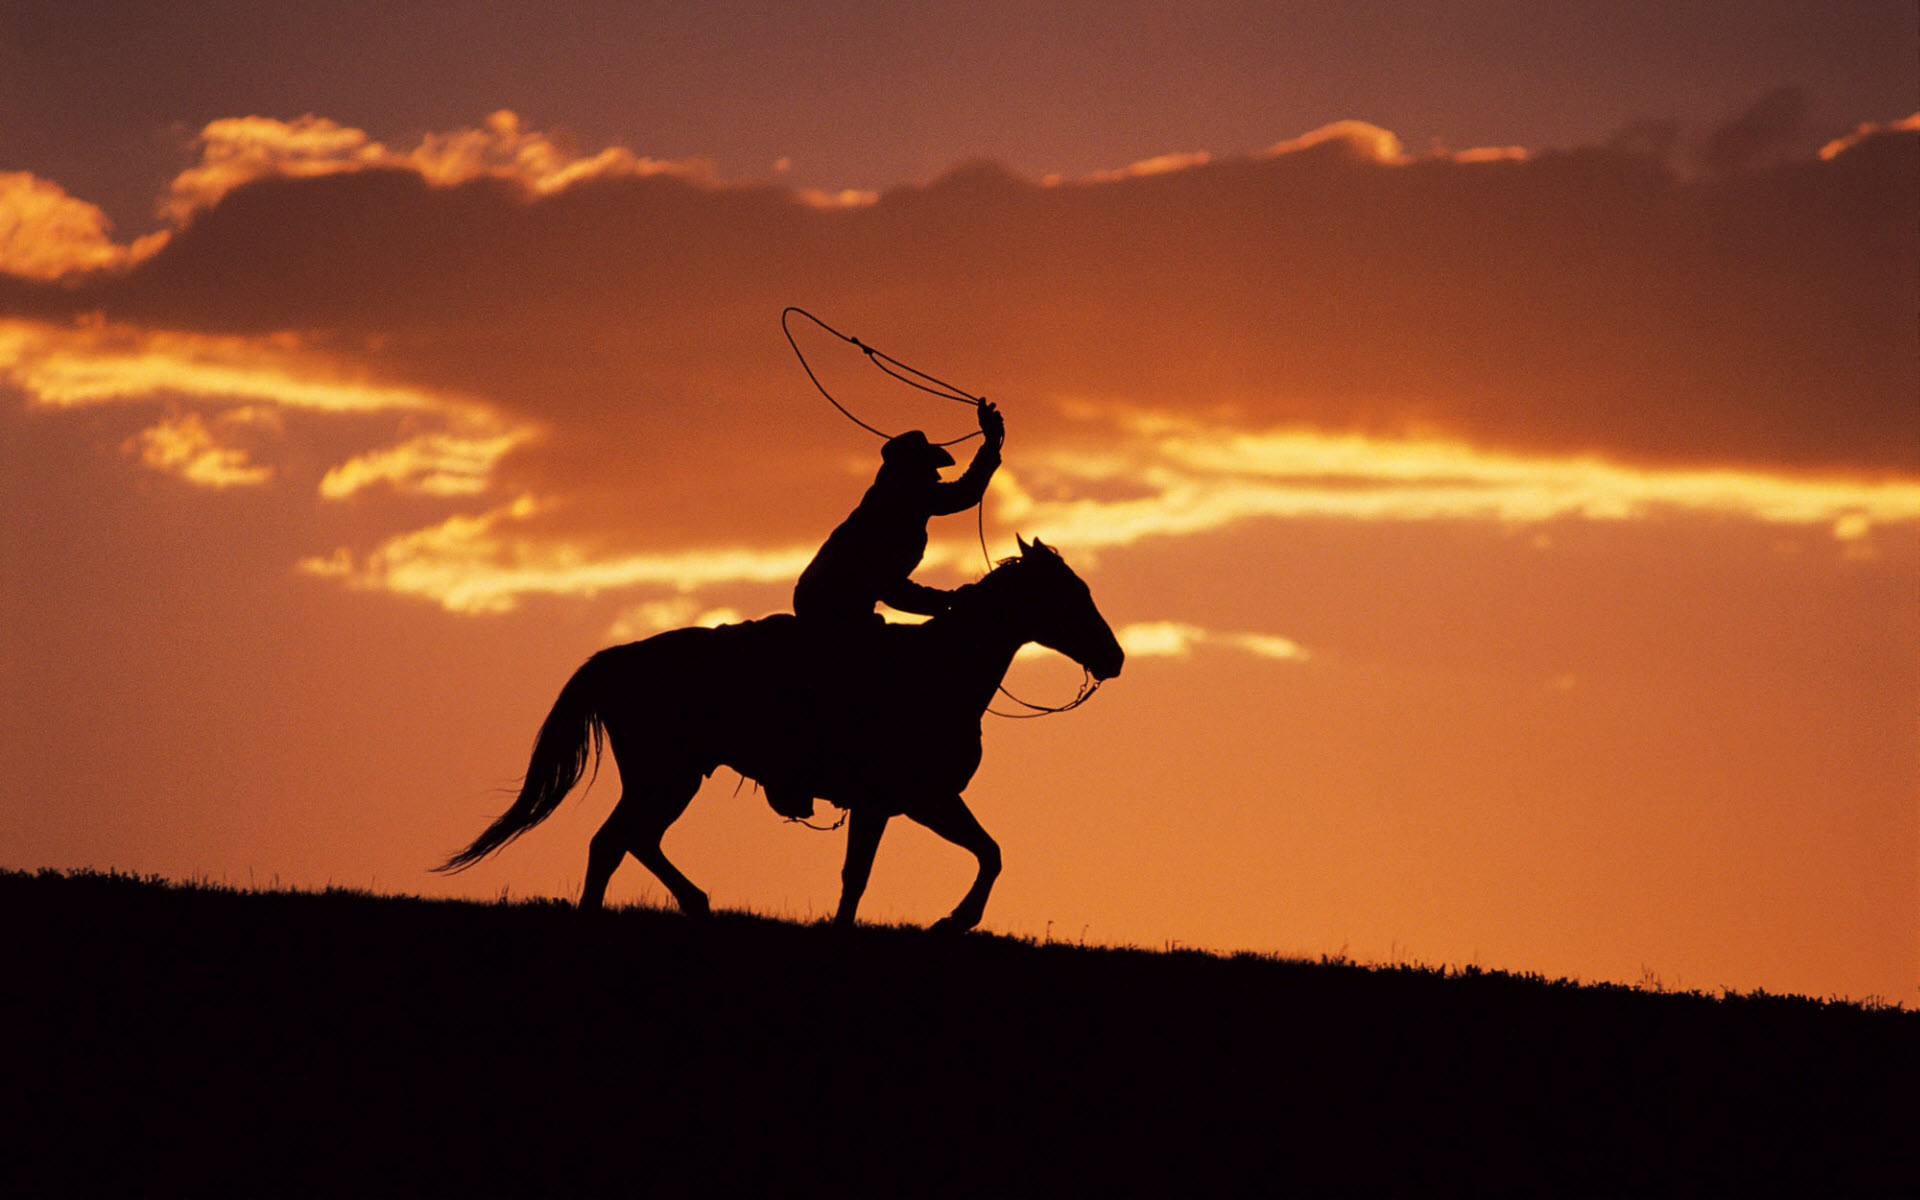 Horse riding at sunset | desktop wallpapers - Picture for ...